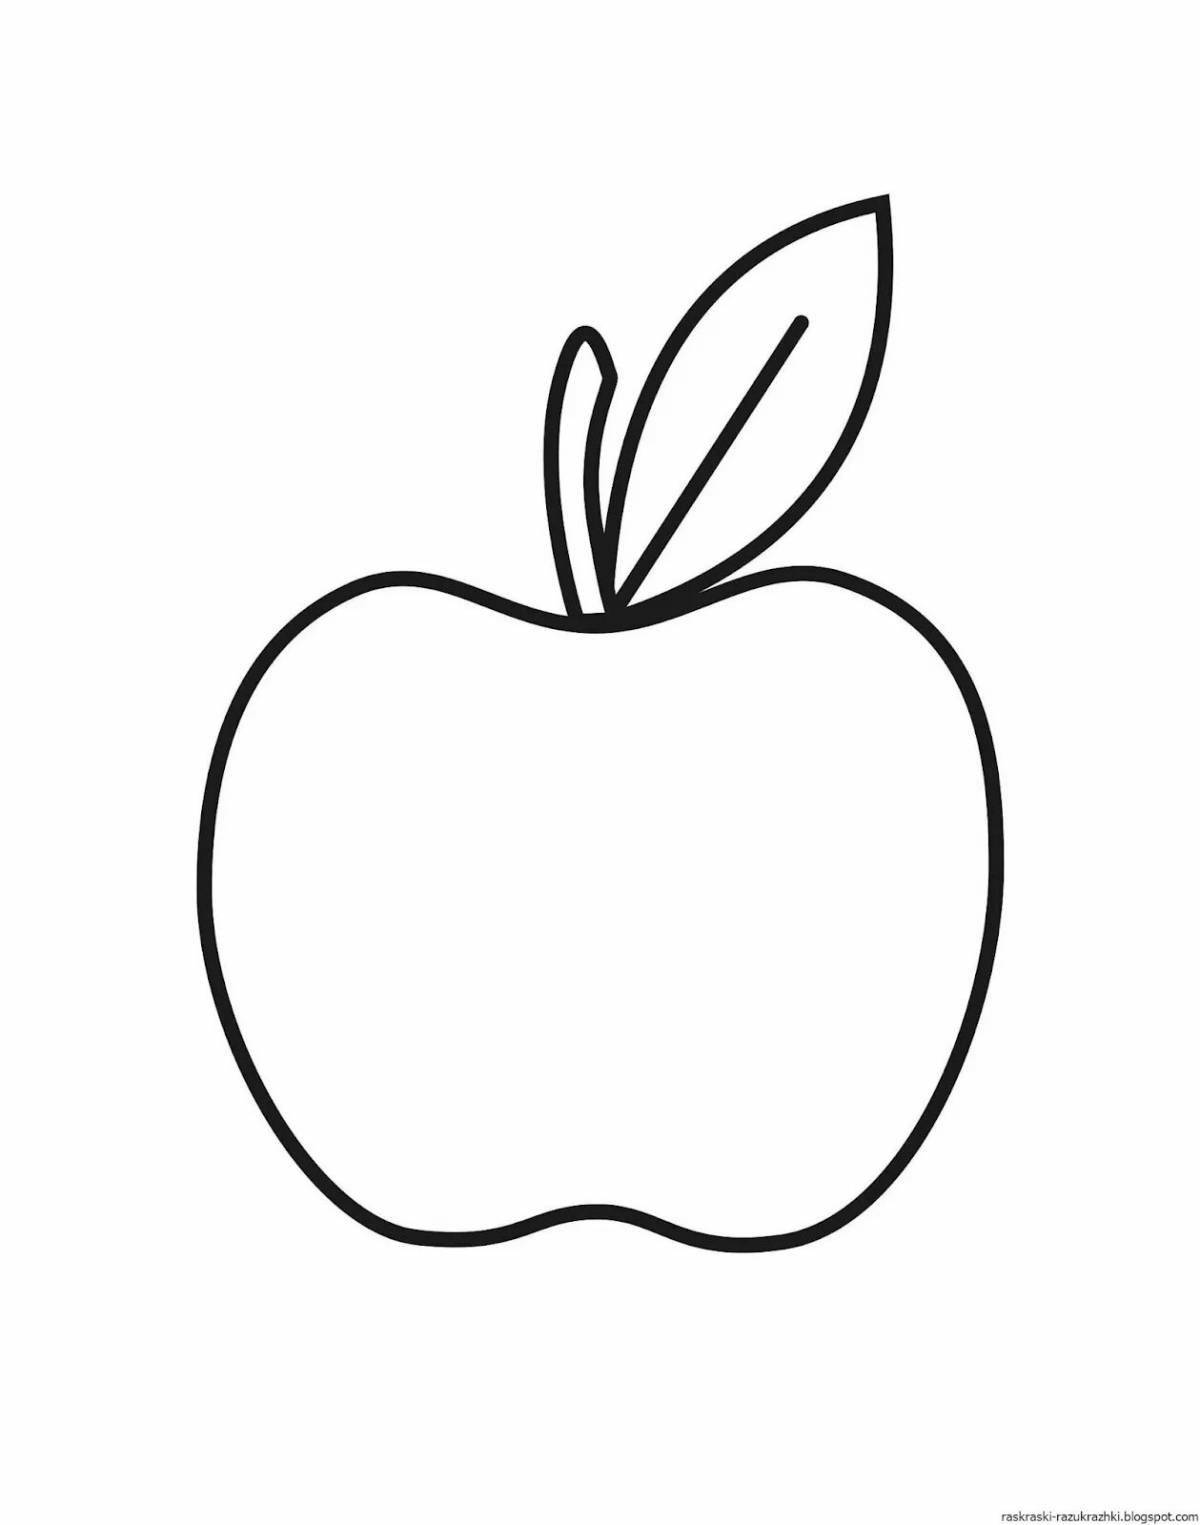 Adorable apple drawing for kids